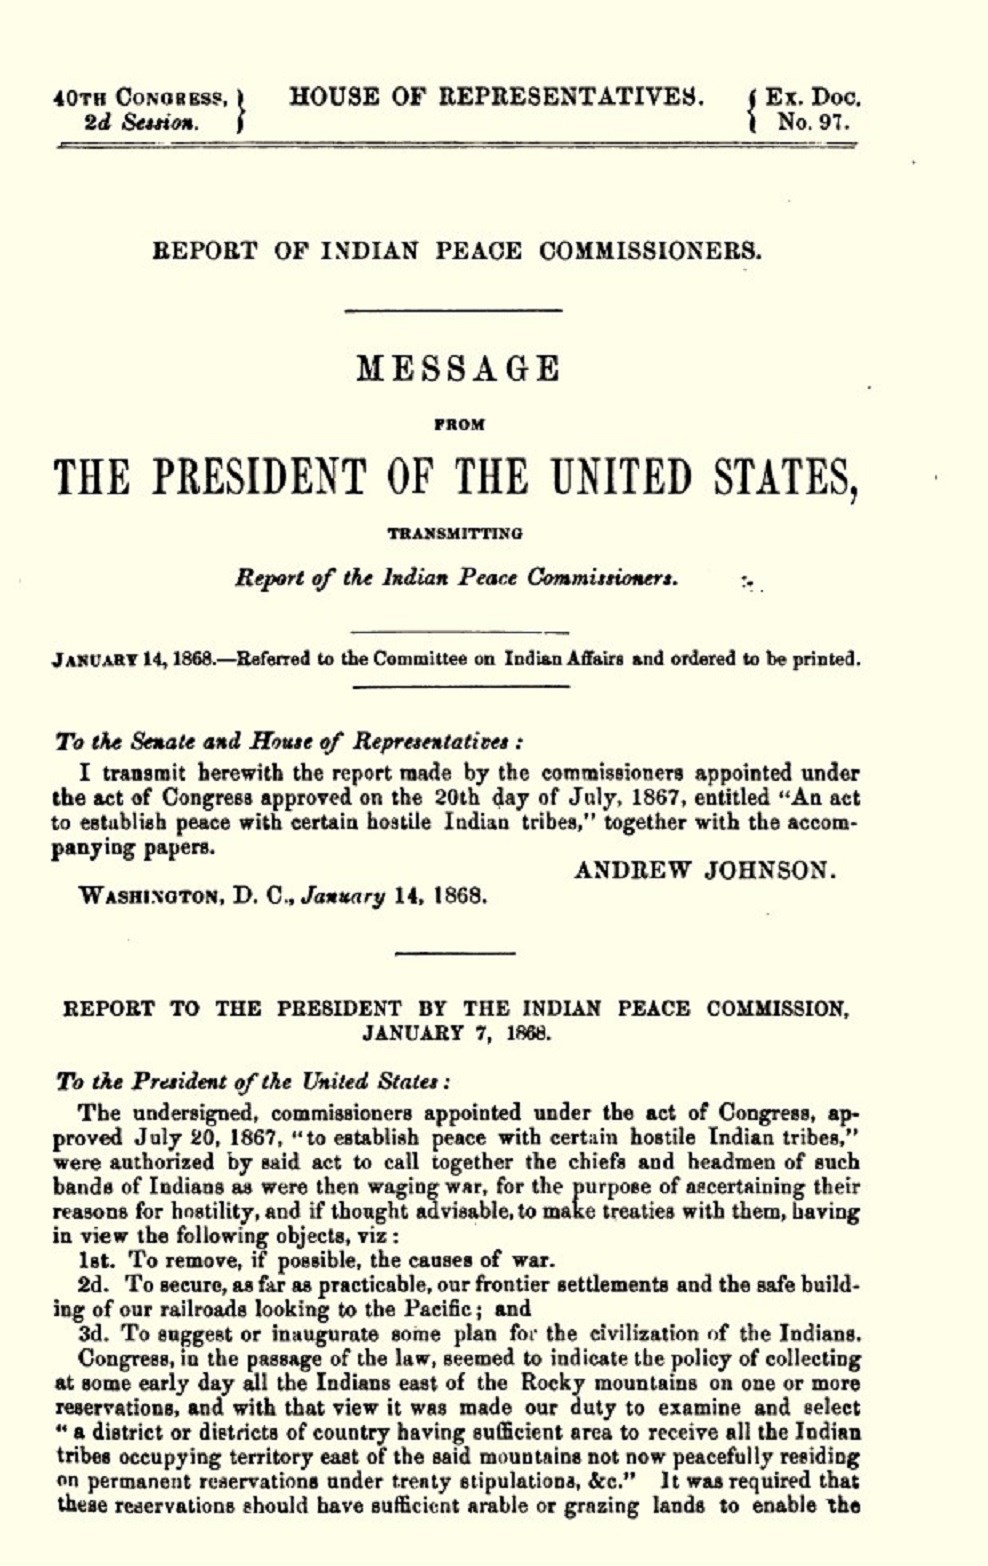 Indian Peace Commission Report, from 1868.